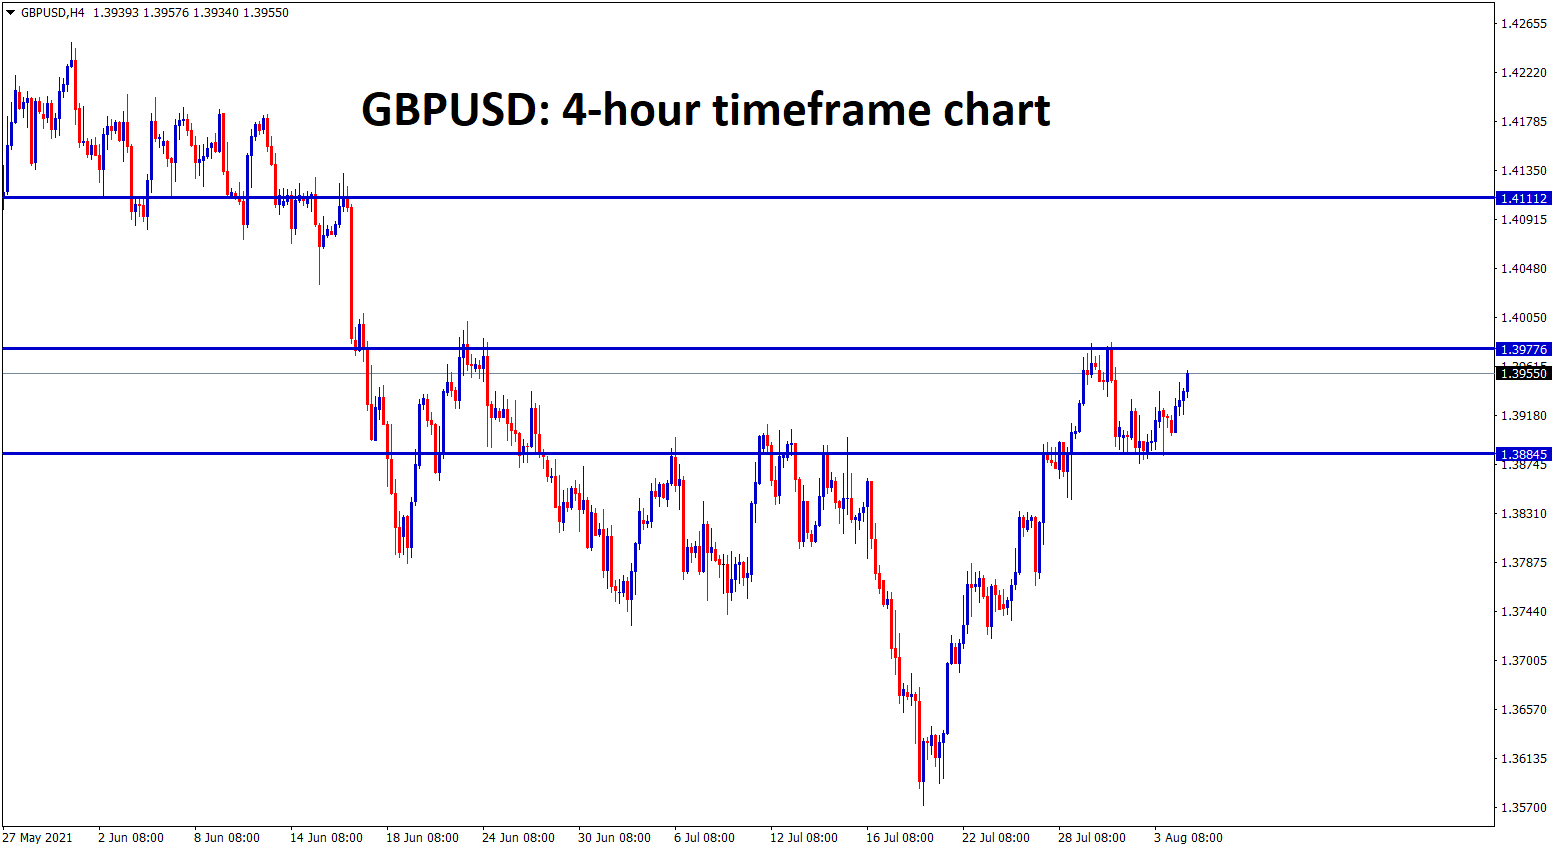 GBPUSD is rising up again to the recent high